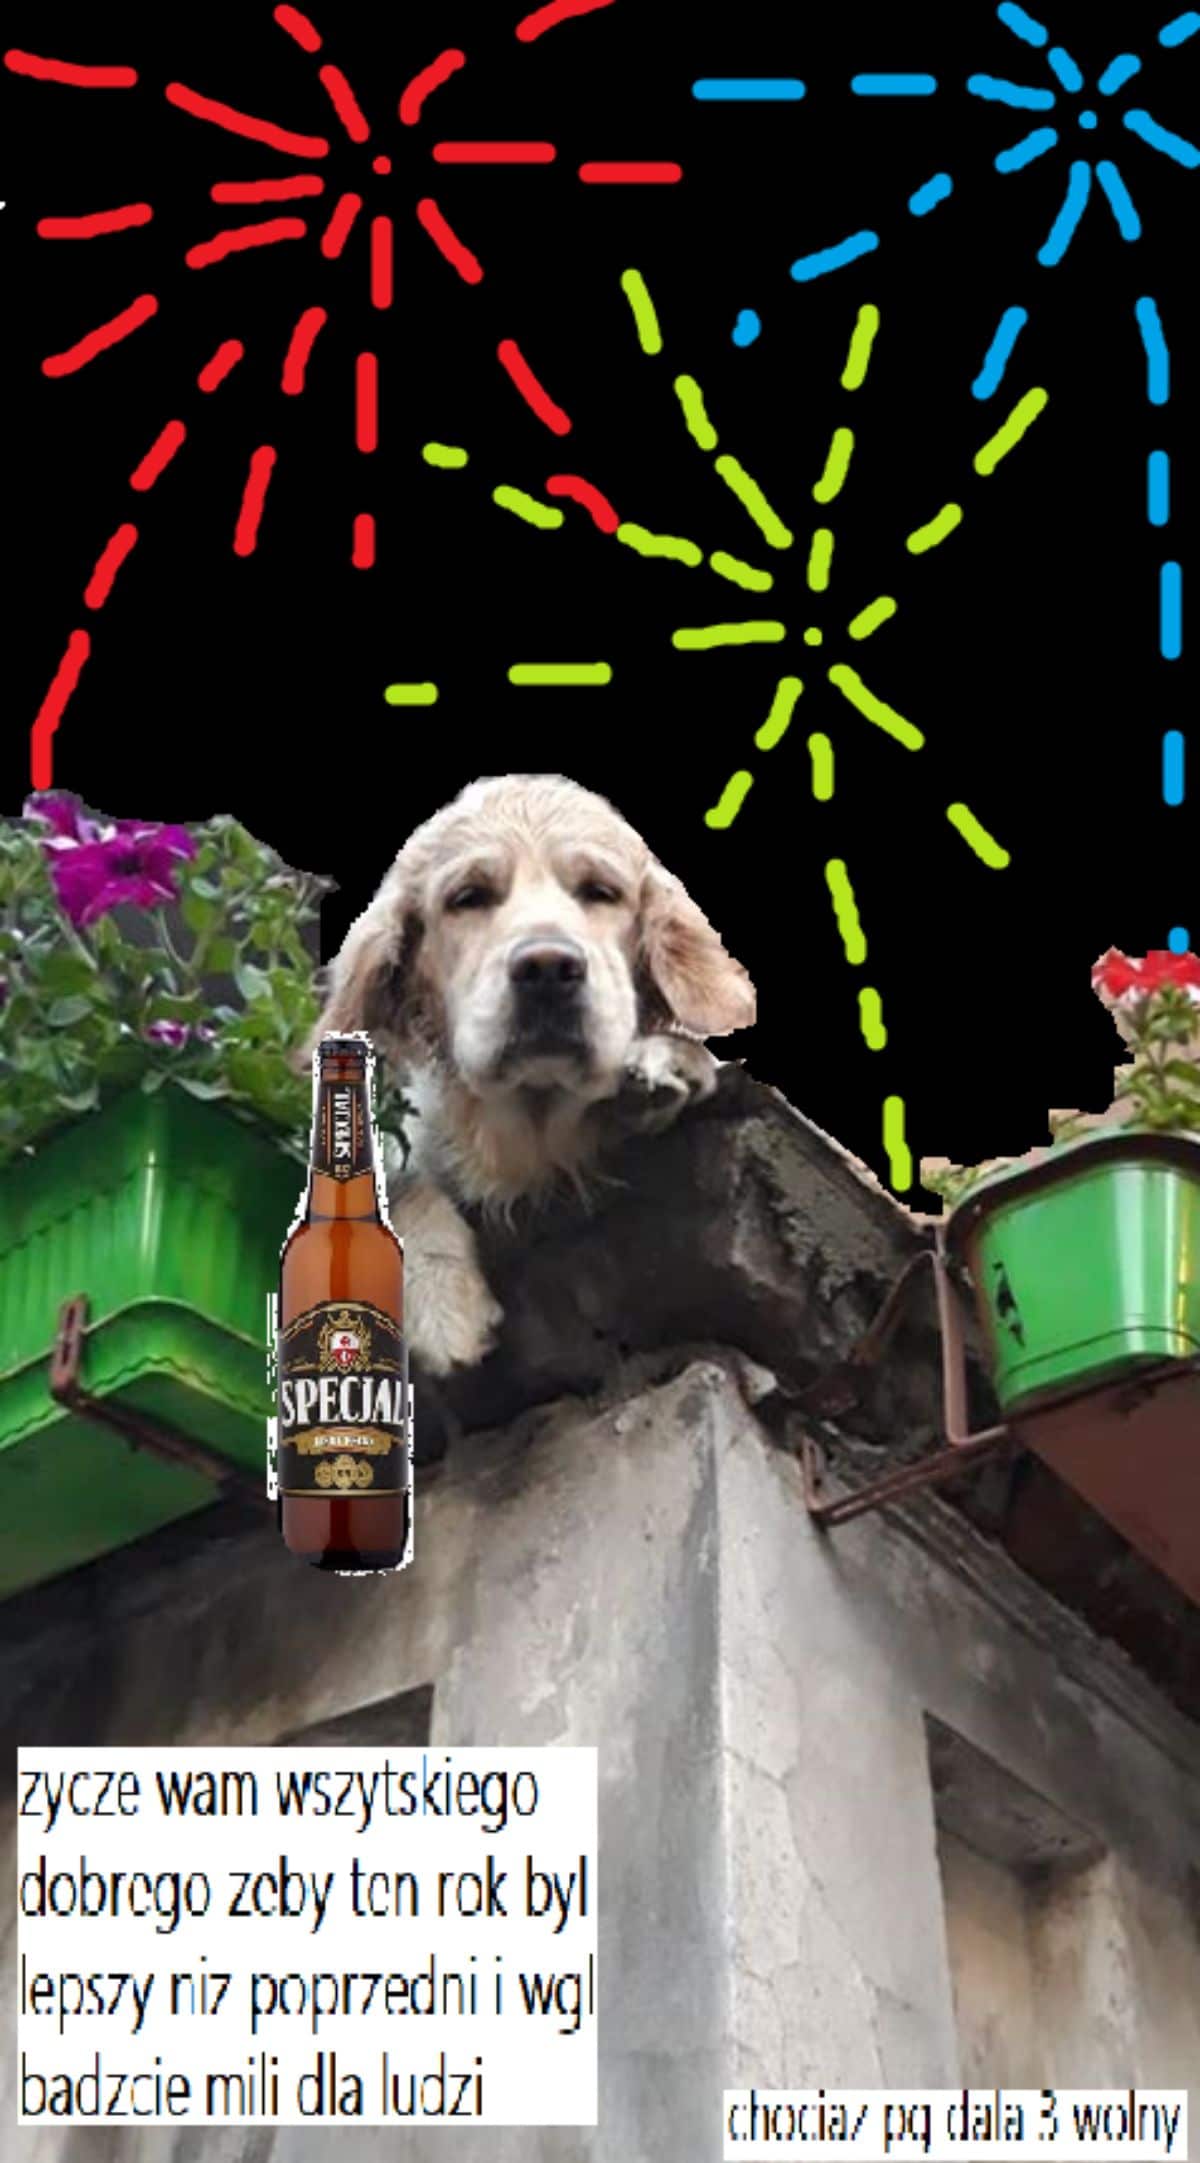 an image of a golden retriever hanging over a balcony photoshopped with fireworks, a bottle of beer and Polish text